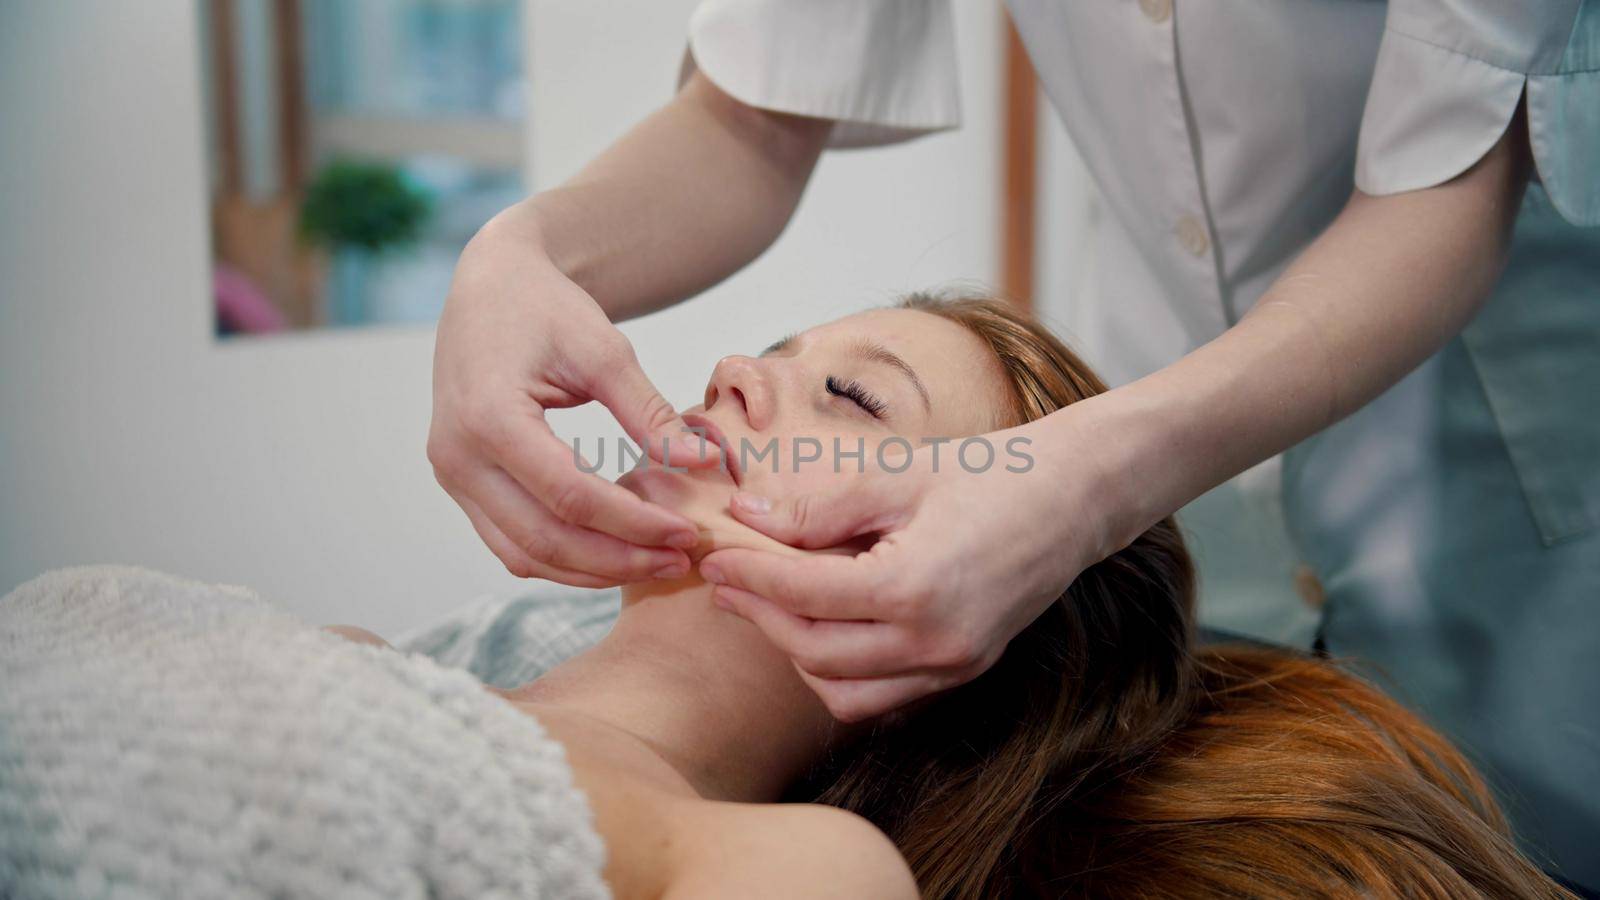 Massage - woman massage therapist massaging the face of a red-haired woman with her hands by Studia72